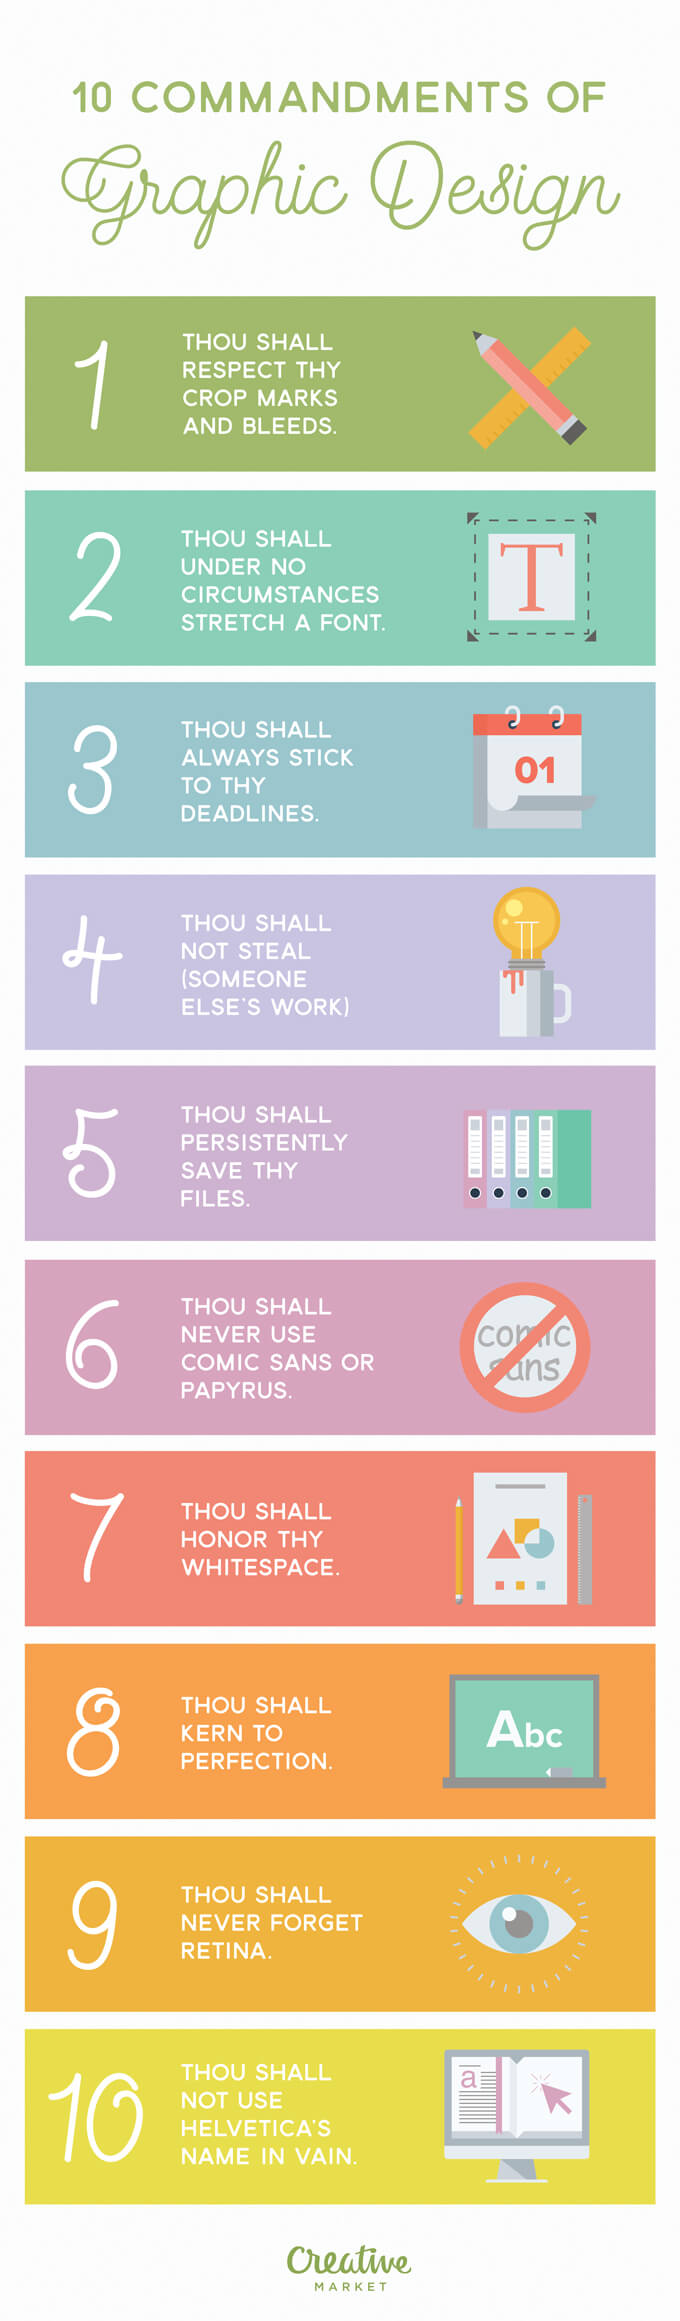 Infographic: 10 Commandments Divine Rules of Graphic Design | CGfrog